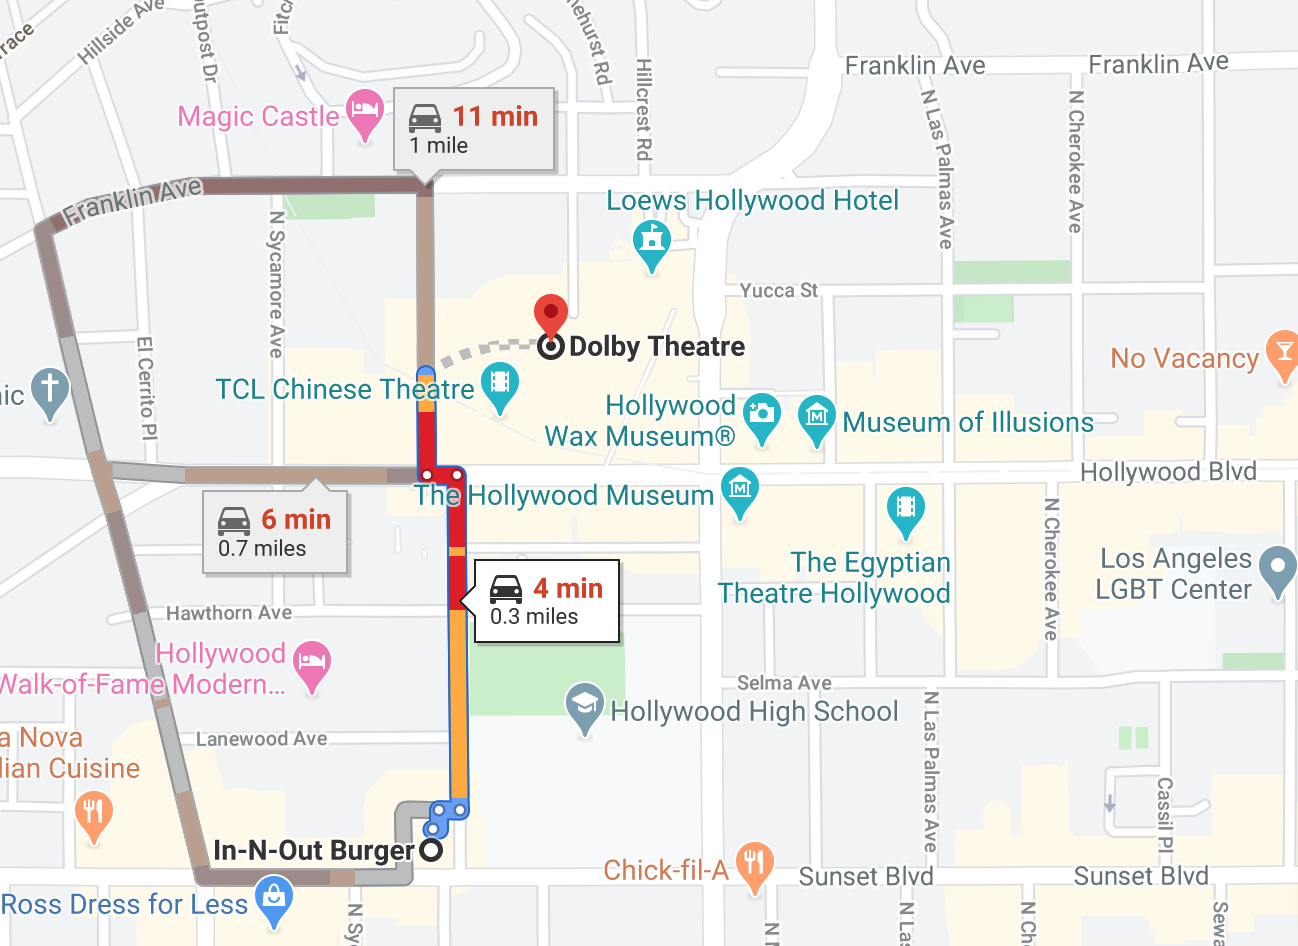 Mapping the route from the Dolby to In-N-Out